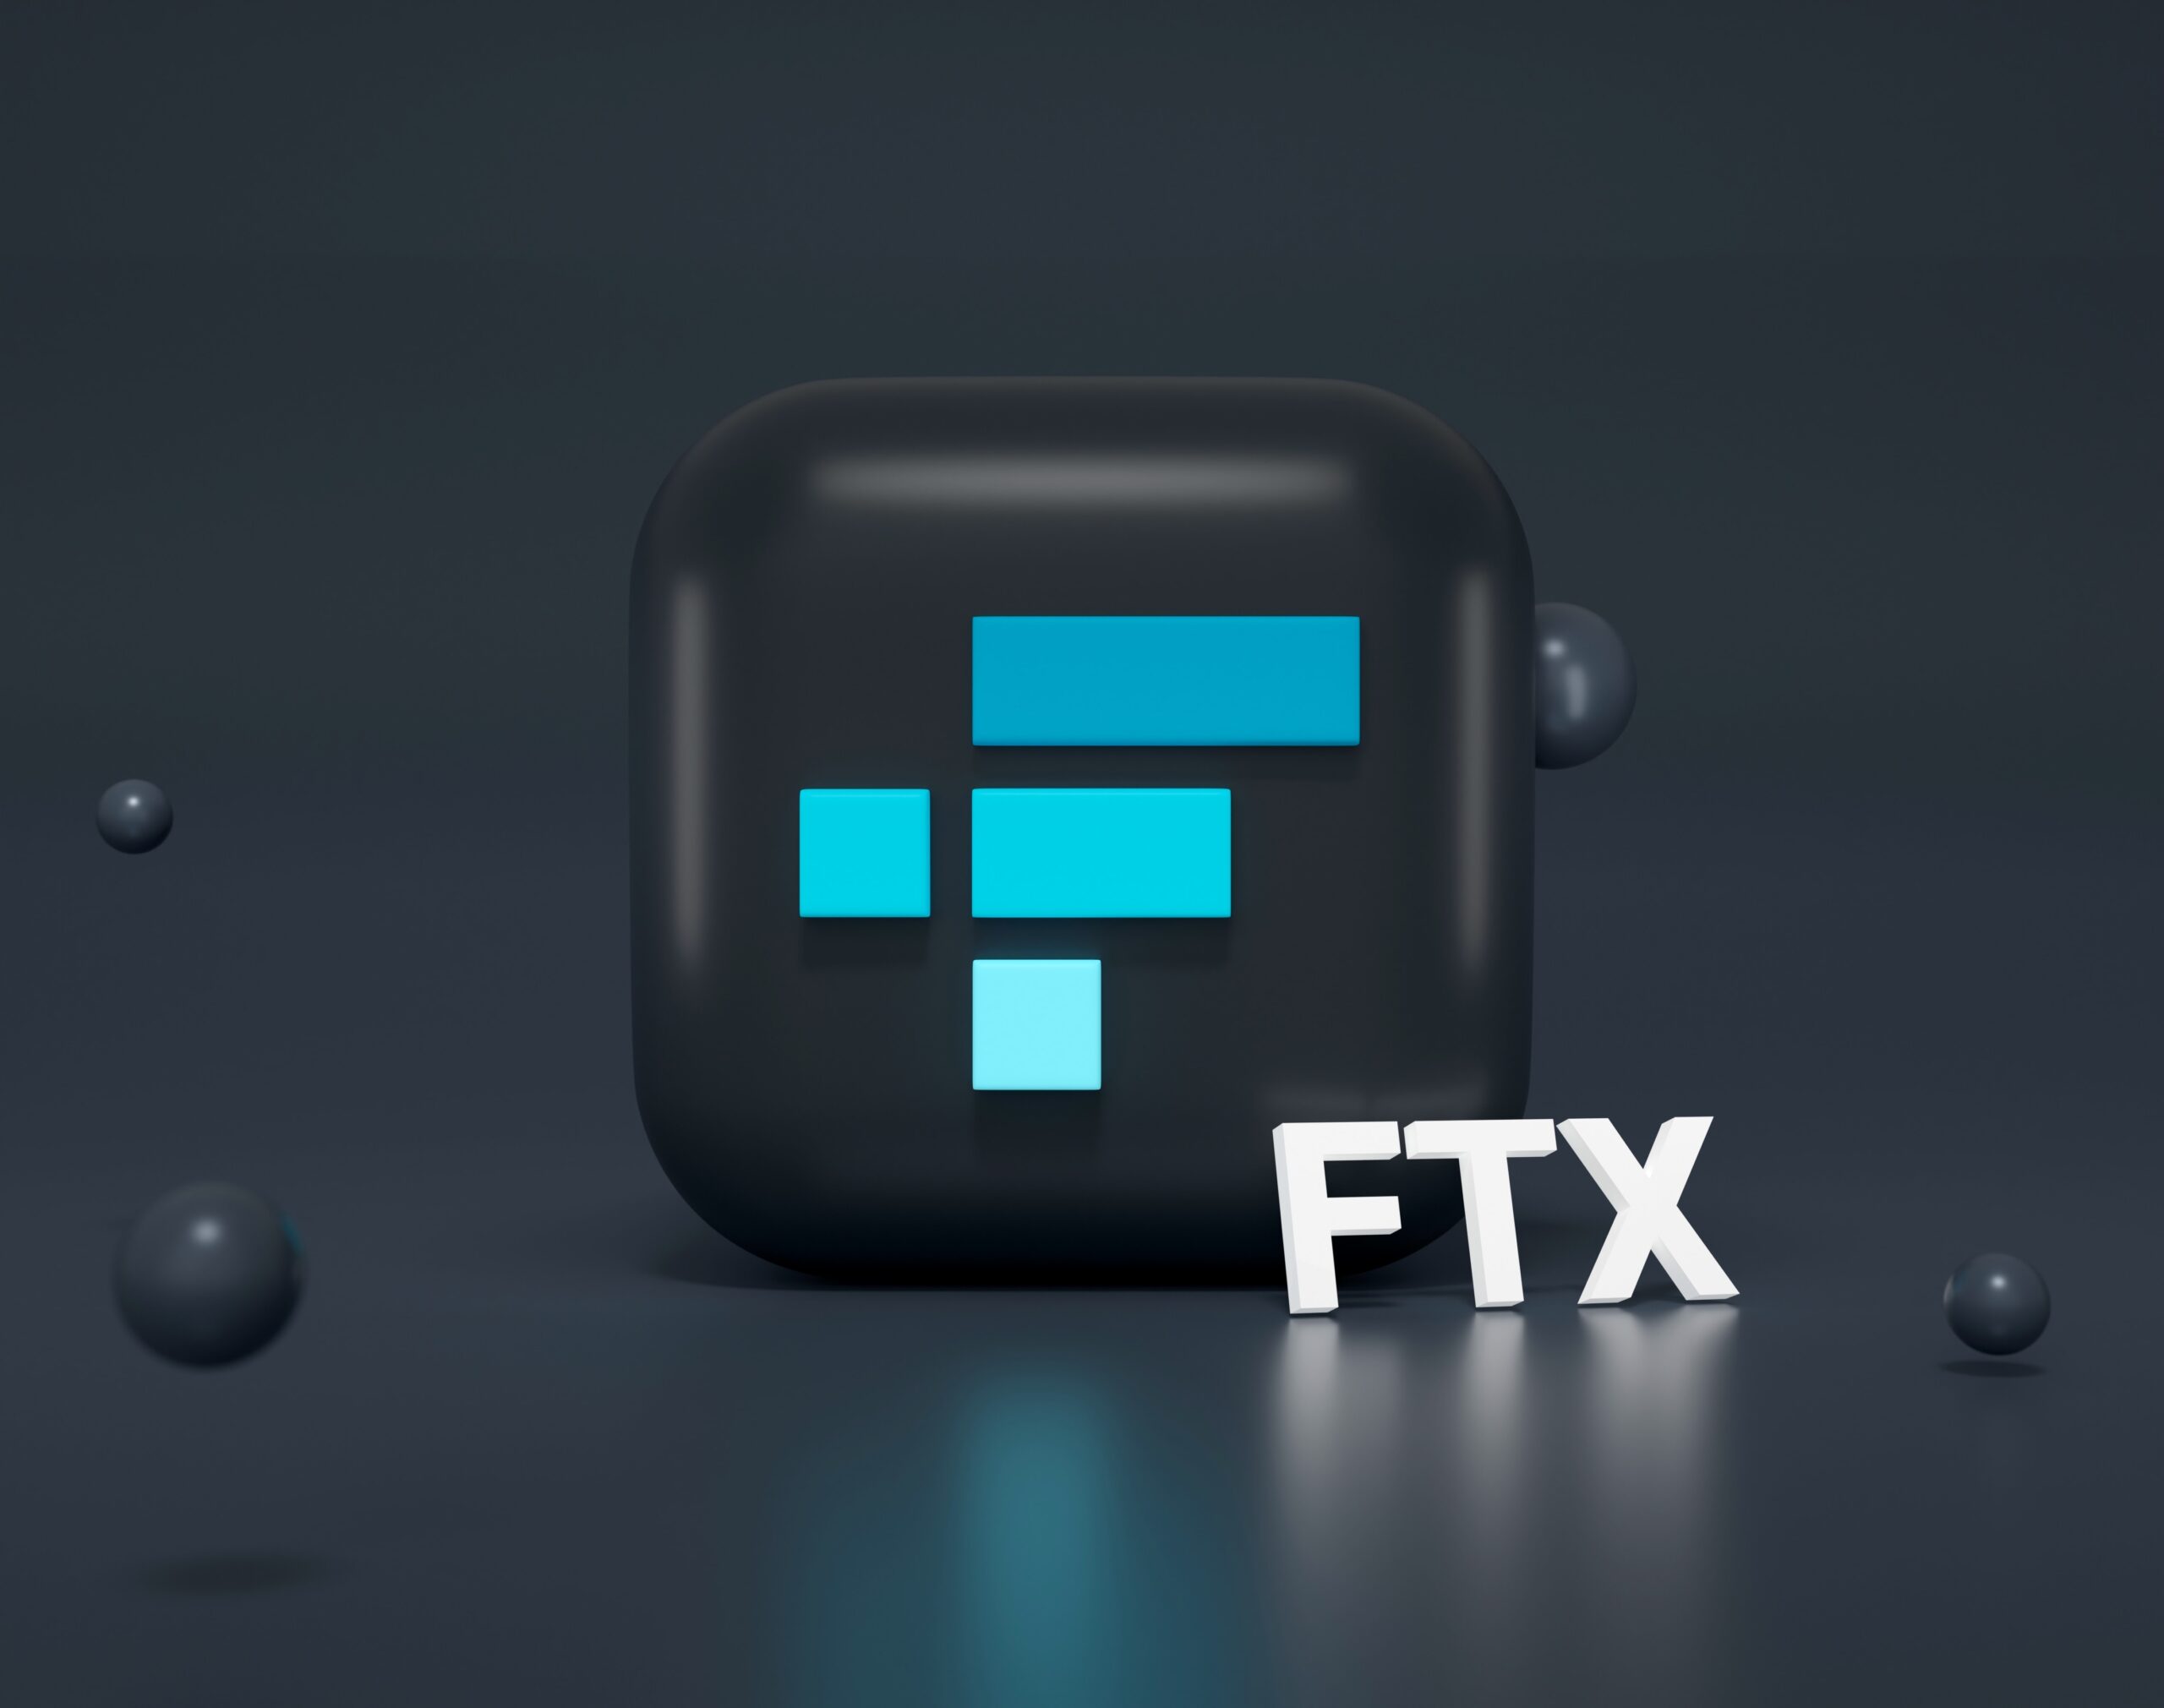 FTX Revival Plan Questioned By Crypto Community